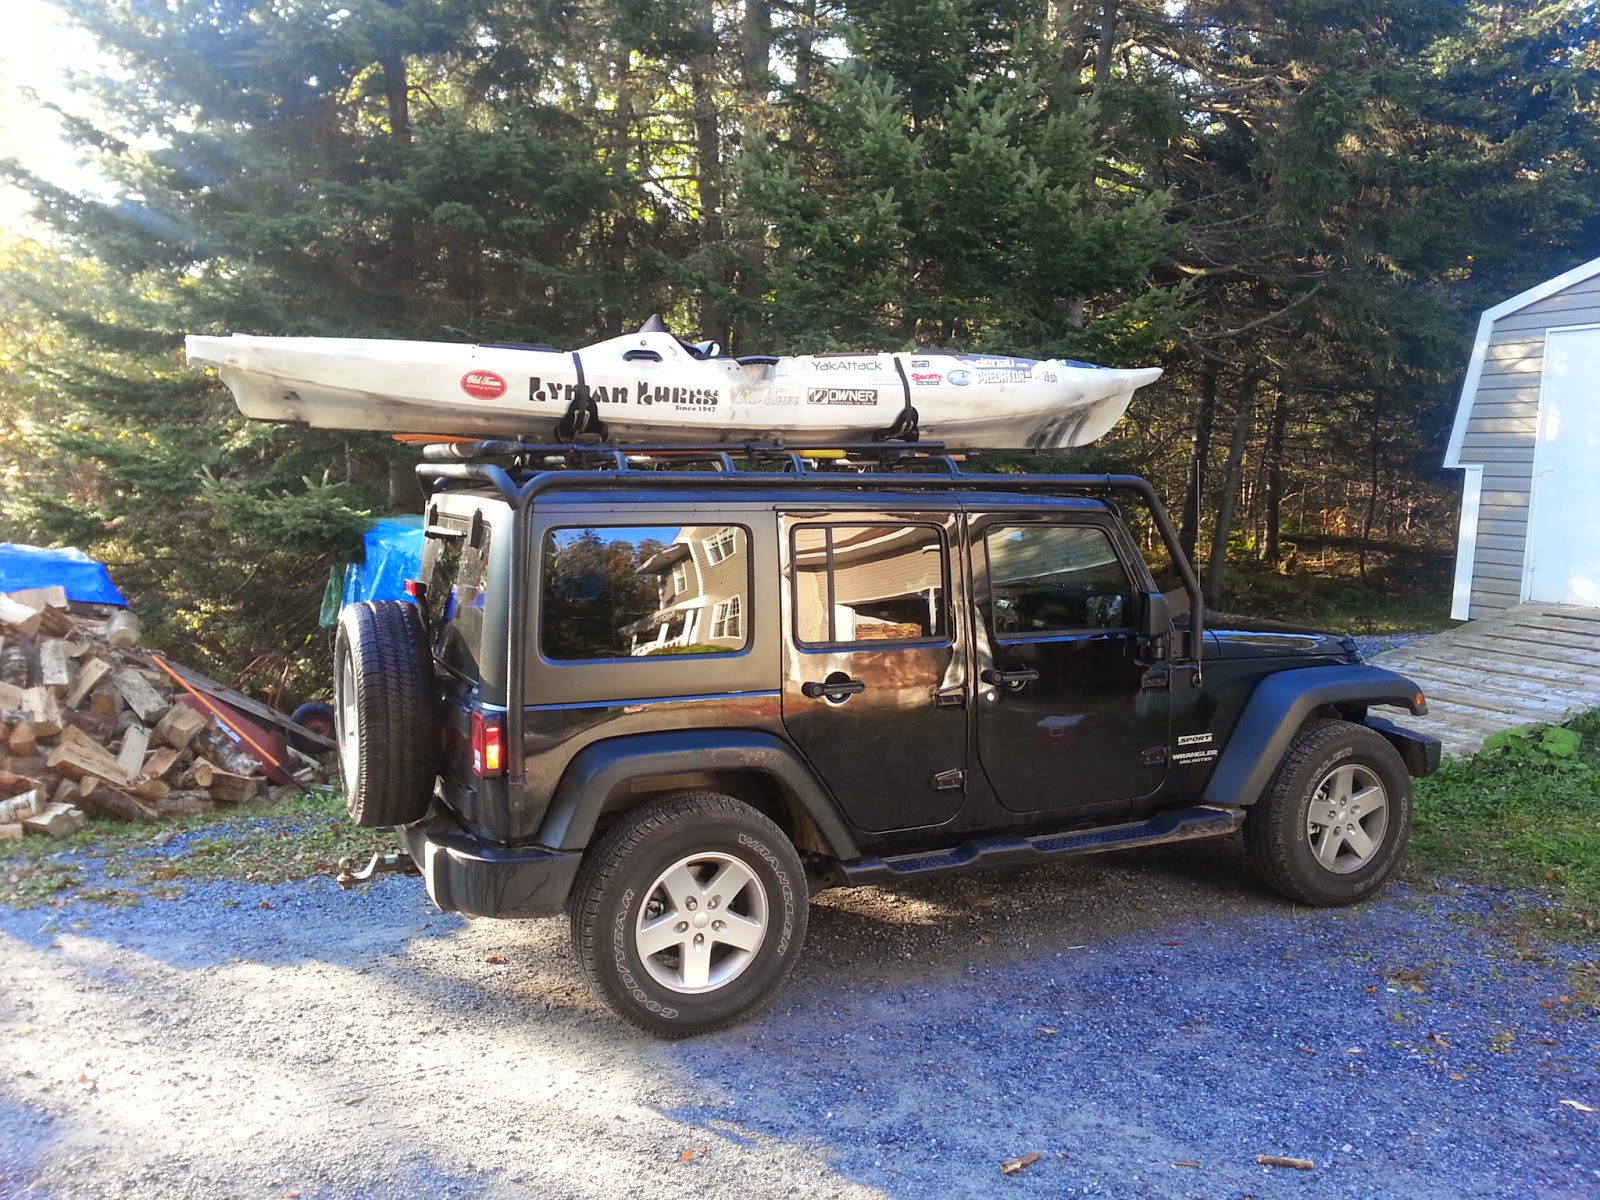 NB Kayak Fishing: The new ride, outfitted with Yakama!